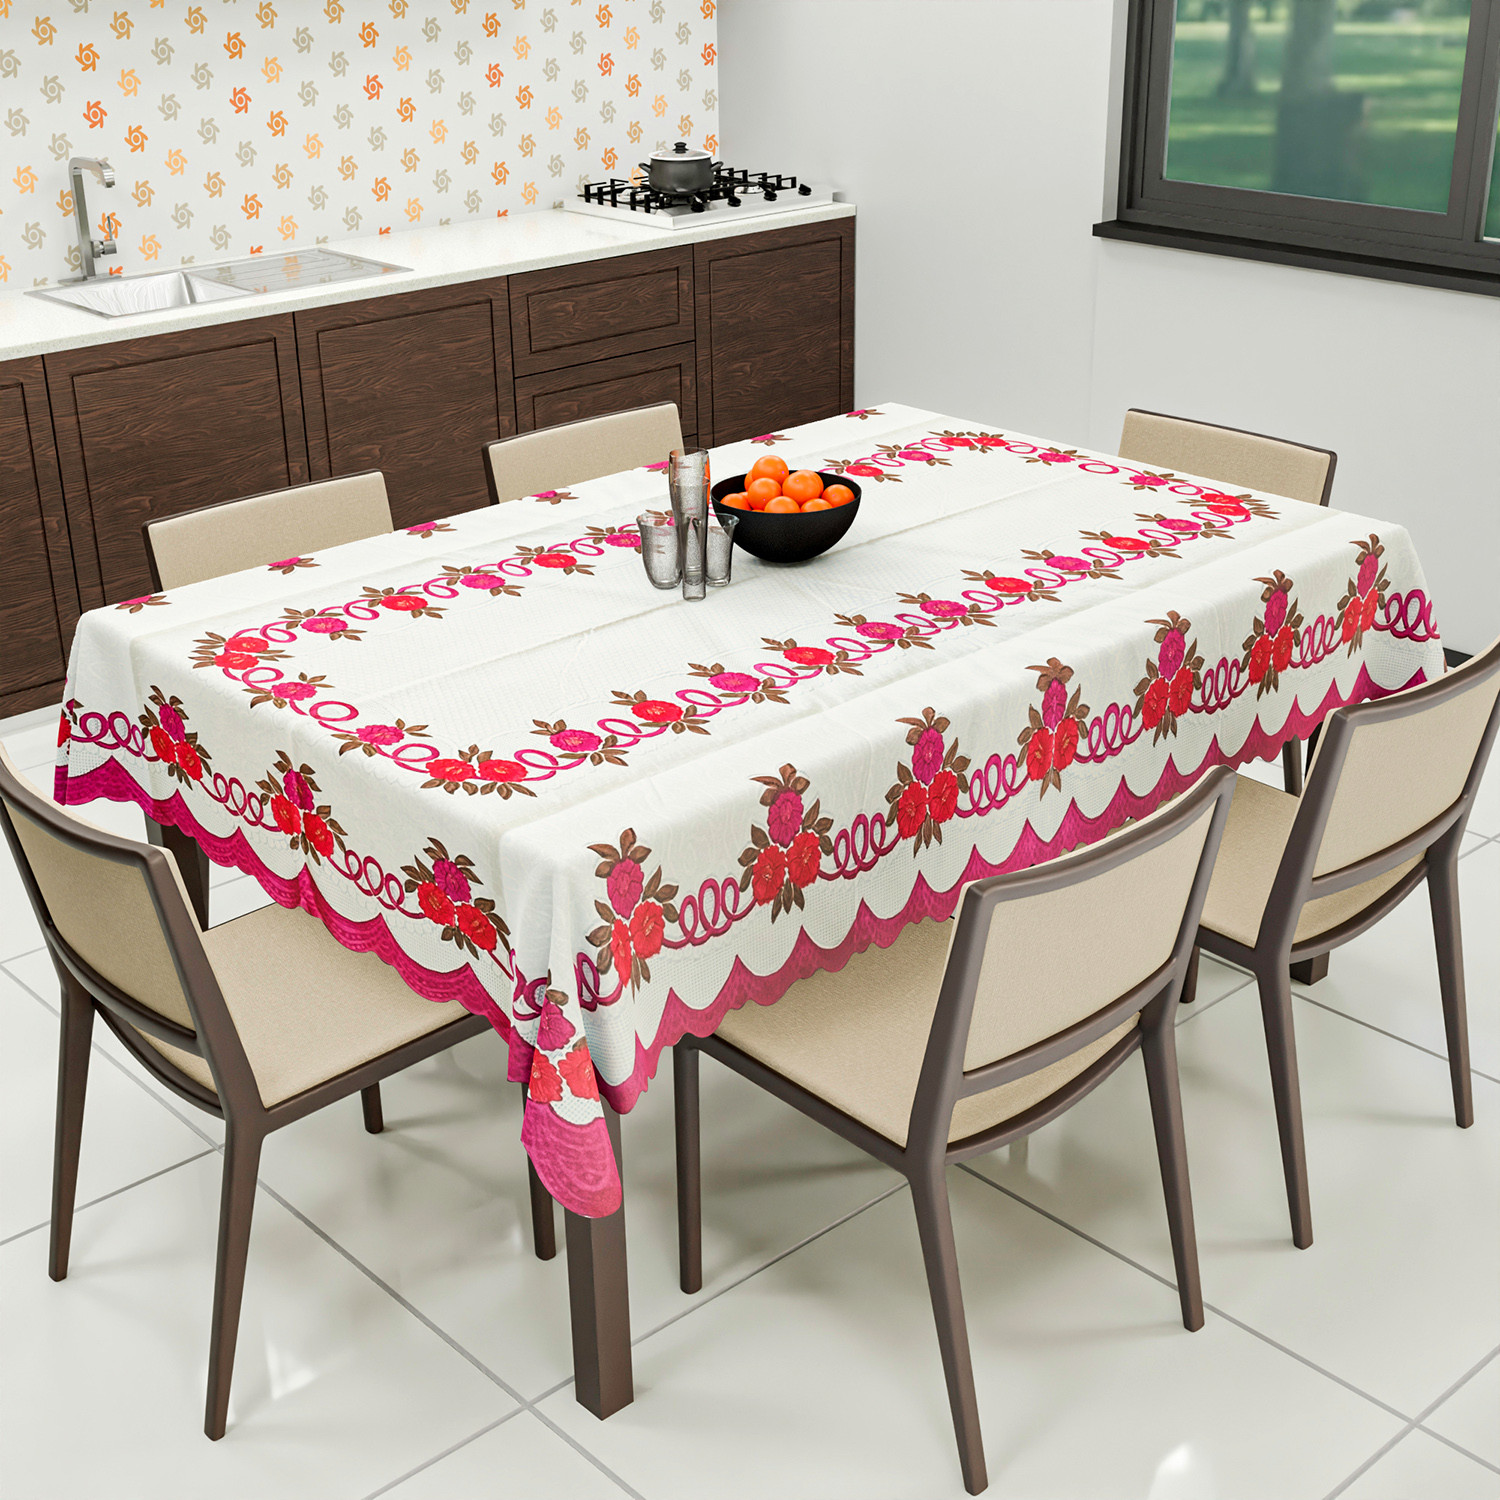 Kuber Industries Cotton Floral Print Waterproof Attractive Dining Table Cover|Tablecloth for Home Decorative, 60x90 Inch (Cream Pink)